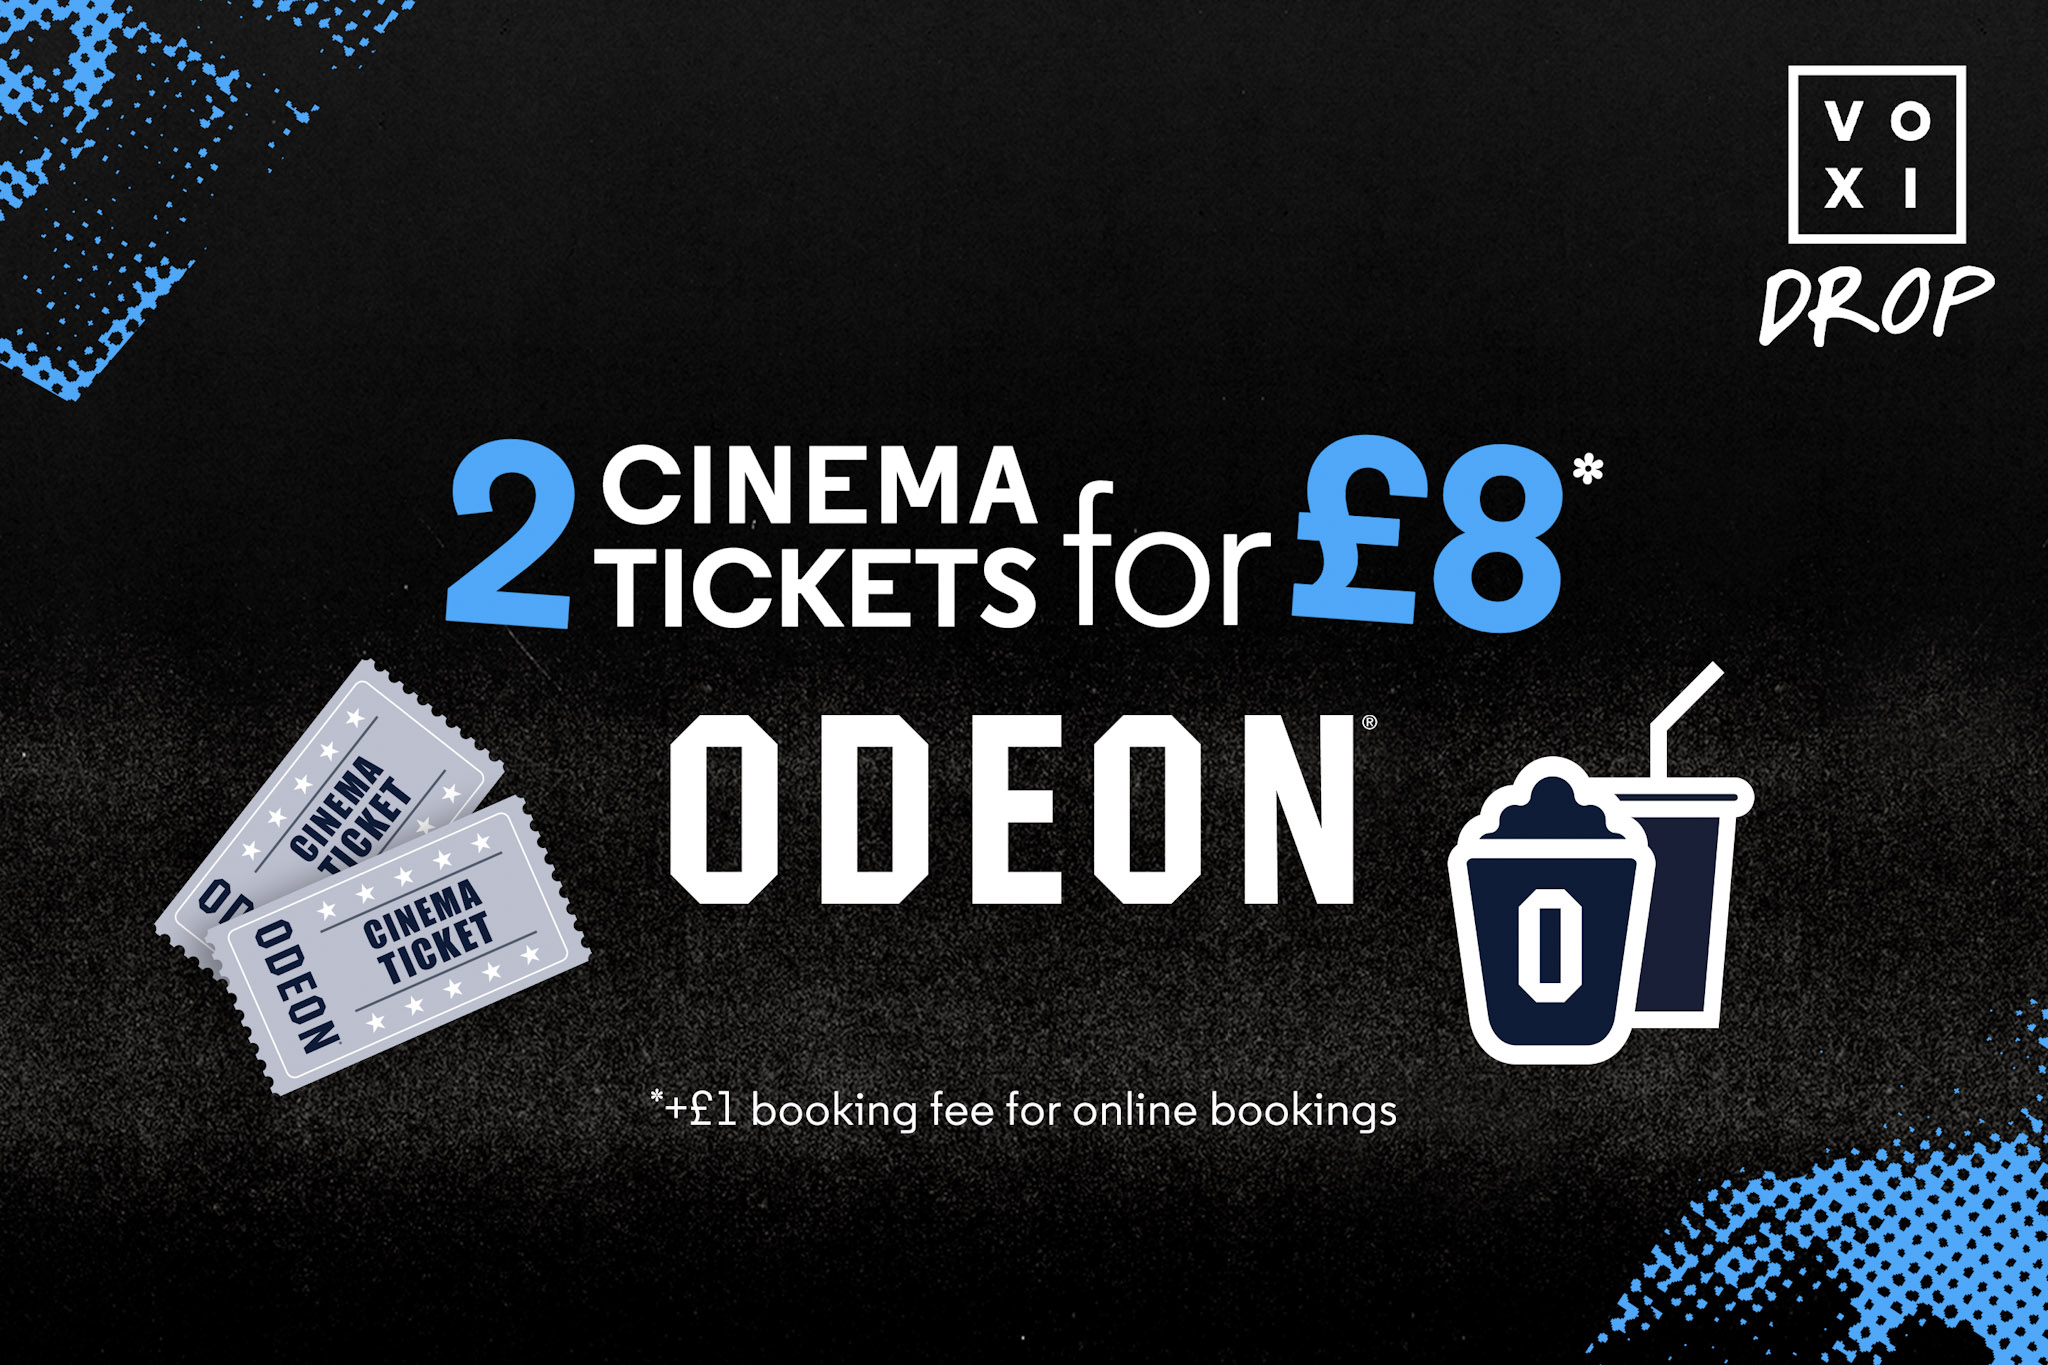 VOXI customers can get two Odeon cinema tickets for £8